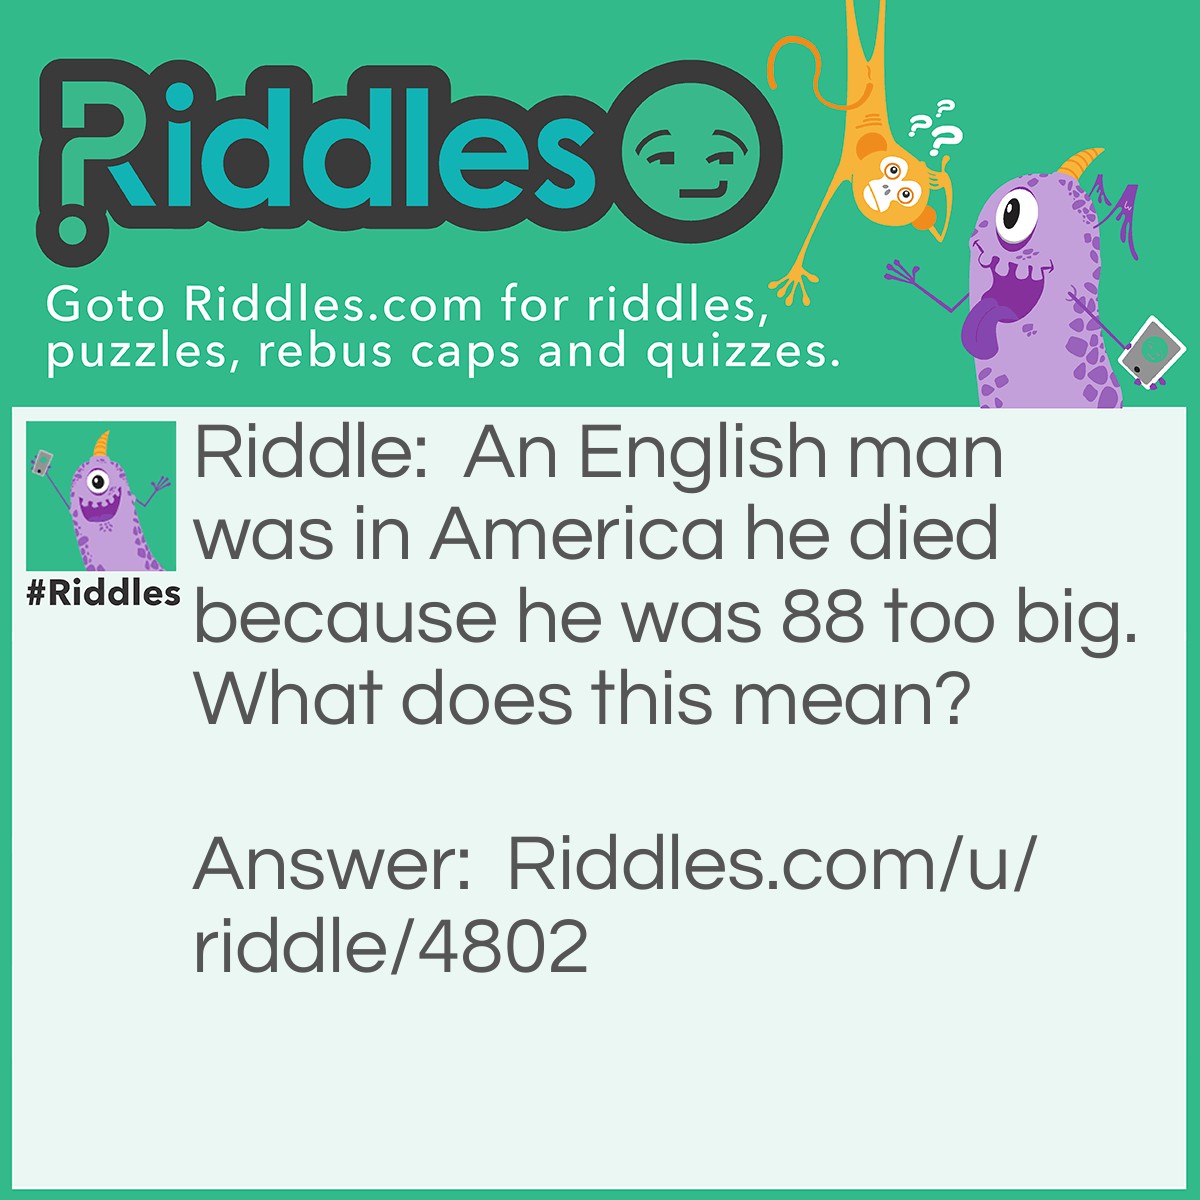 Riddle: An English man was in America he died because he was 88 too big. What does this mean? Answer: He had hurt himself and called 999 instead of 911 therefore he was 88 too big.